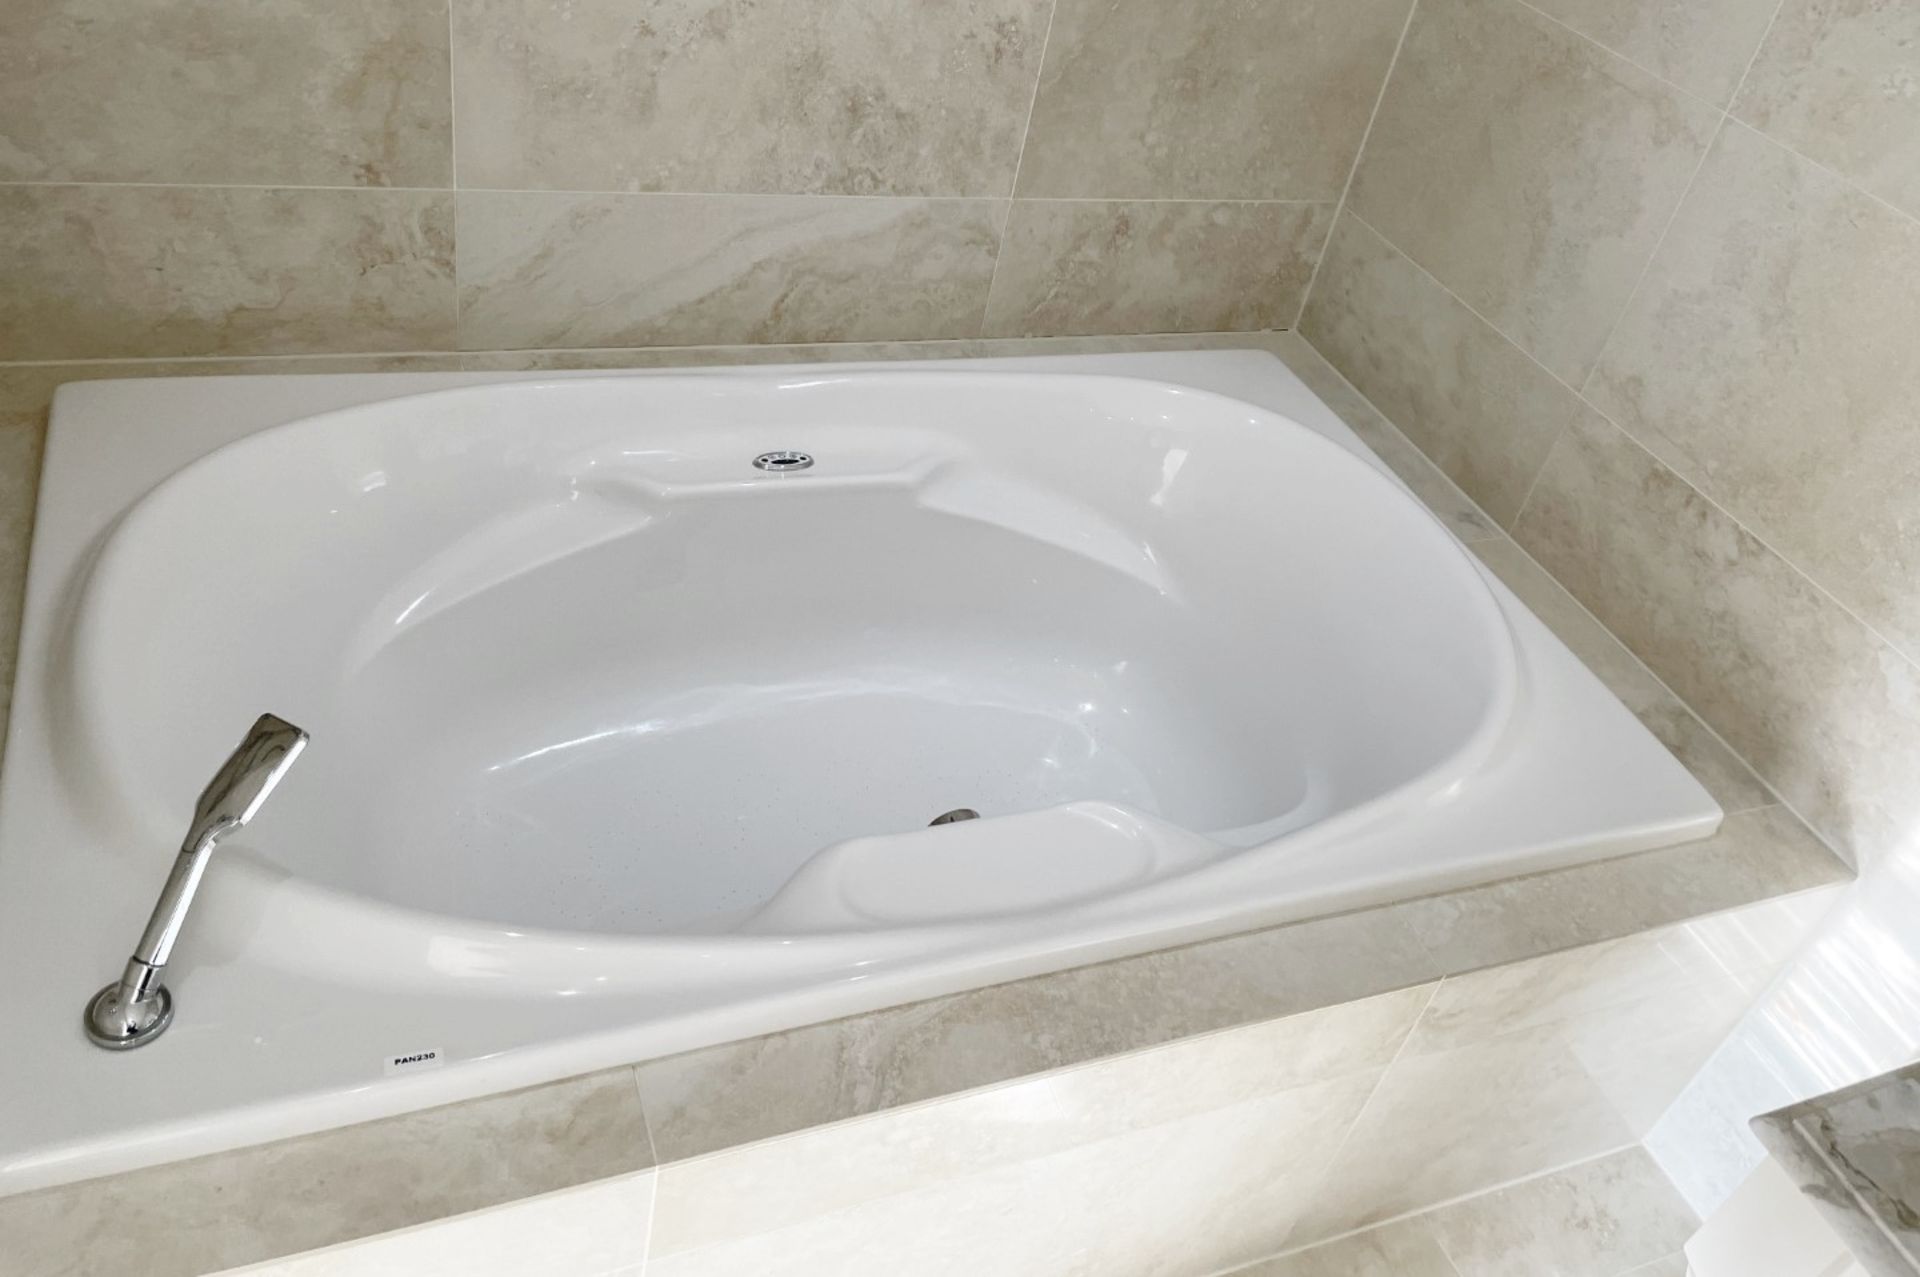 1 x AIRBATH Large Jacuzzi Spa Bath, with Axor Thermostat  - Ref: PAN230 Bed1/bth - CL896 - NO VAT - Image 4 of 12